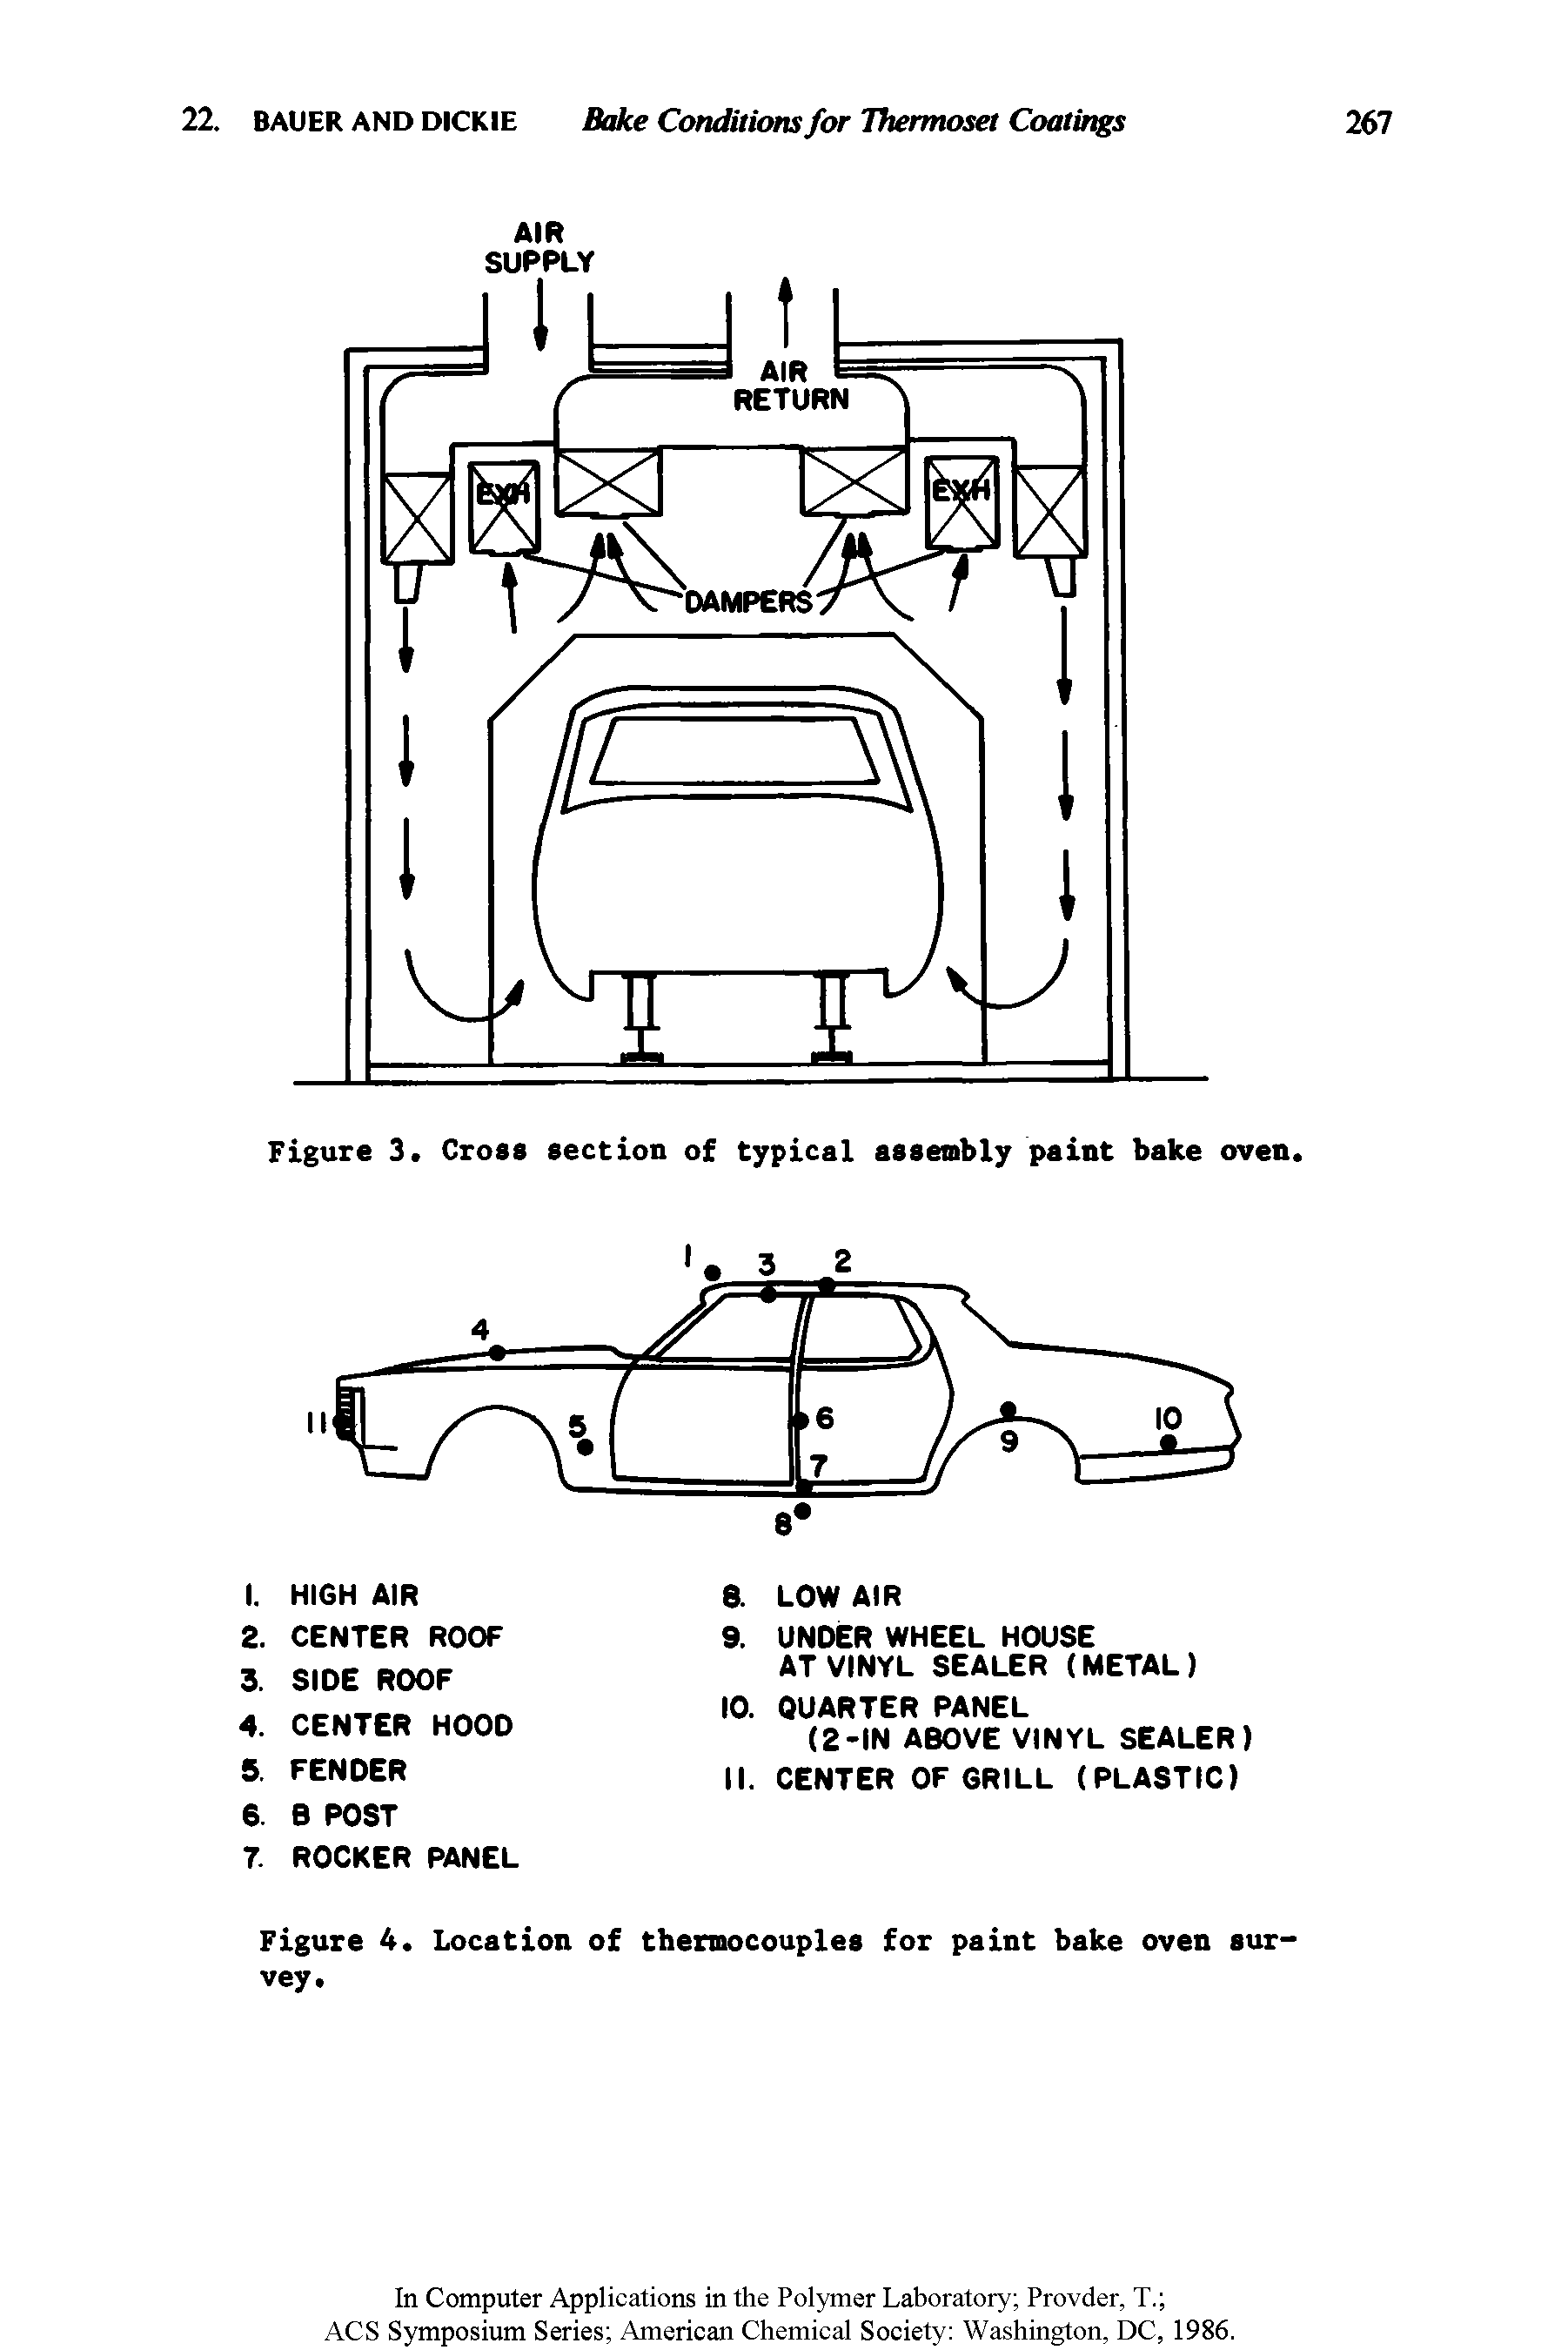 Figure 3. Cross section of typical assembly paint bake oven.